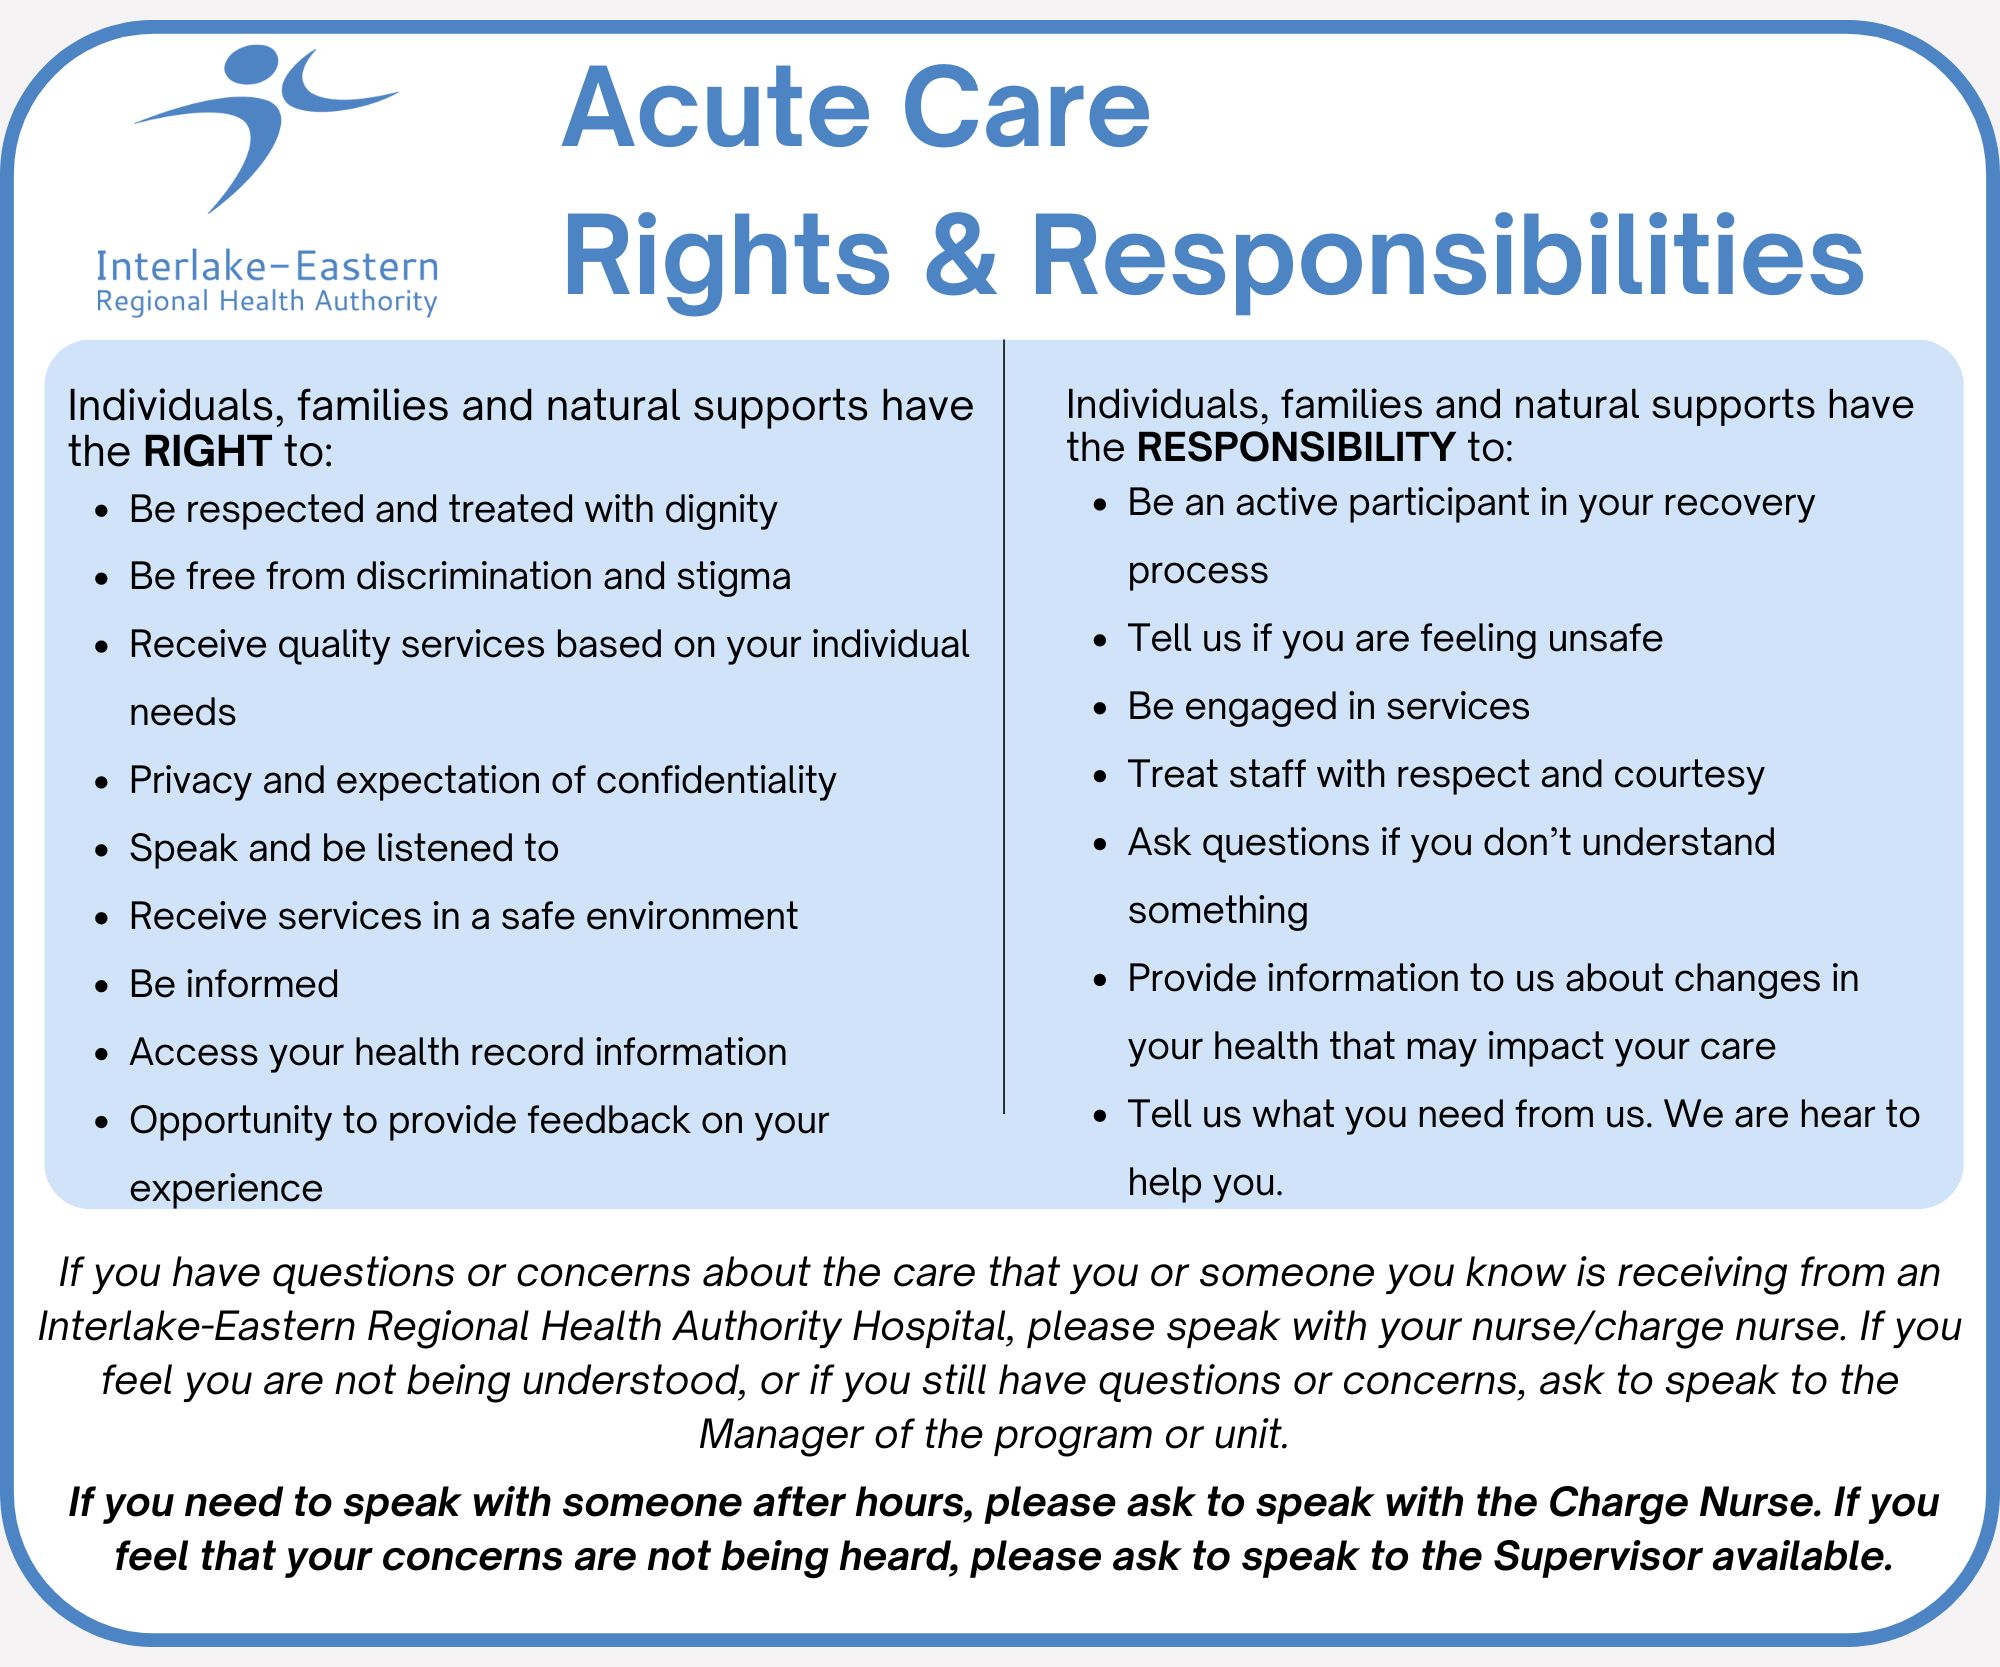 Acute Care Rights & Responsibilities ndividuals, families and natural supports have the RIGHT to: Be respected and treated with dignity Be free from discrimination and stigma Receive quality services based on your individual needs Privacy and expectation of confidentiality Speak and be listened to Receive services in a safe environment Be informed Access your health record information Opportunity to provide feedback on your experience. Individuals, families and natural supports have the RESPONSIBILITY to: Be an active participant in your recovery process Tell us if you are feeling unsafe Be engaged in services Treat staff with respect and courtesy Ask questions if you don’t understand something Provide information to us about changes in your health that may impact your care Tell us what you need from us. We are hear to help you.